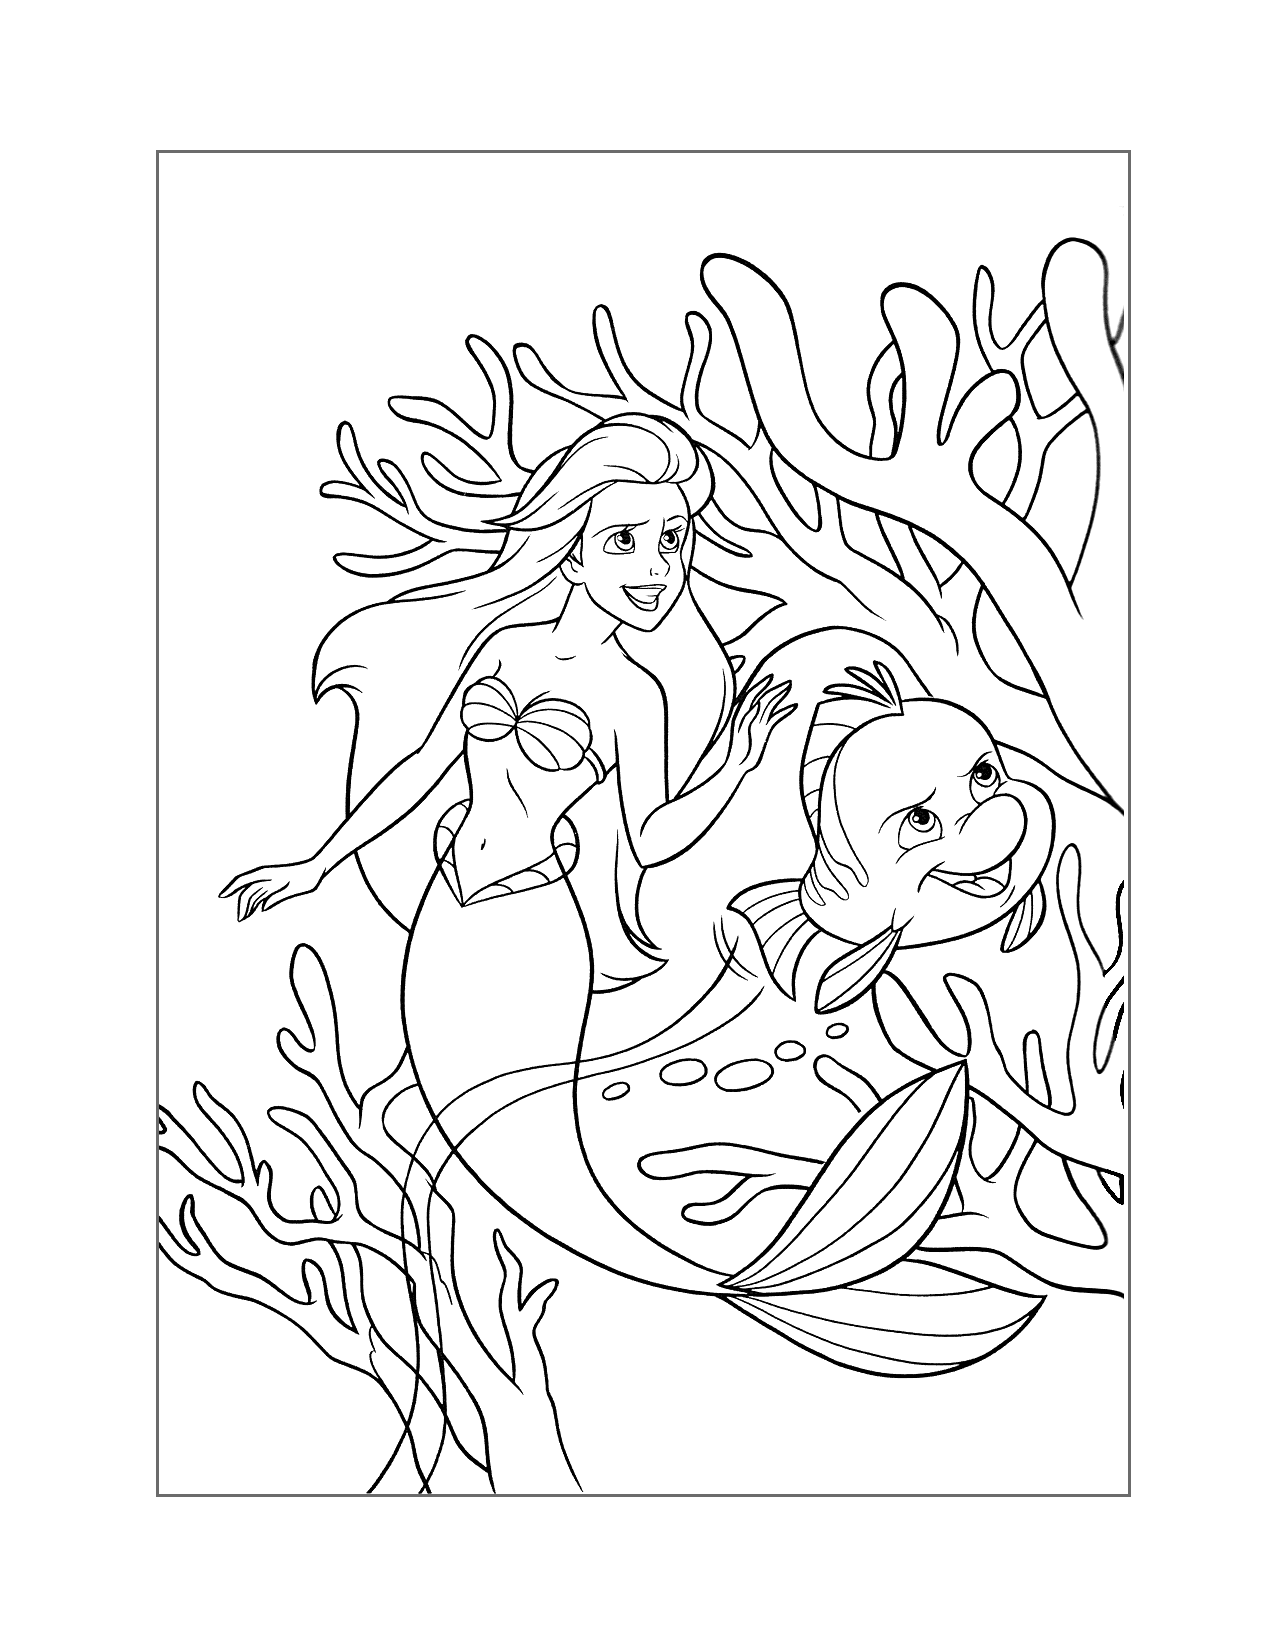 Little mermaid pages â printable pages